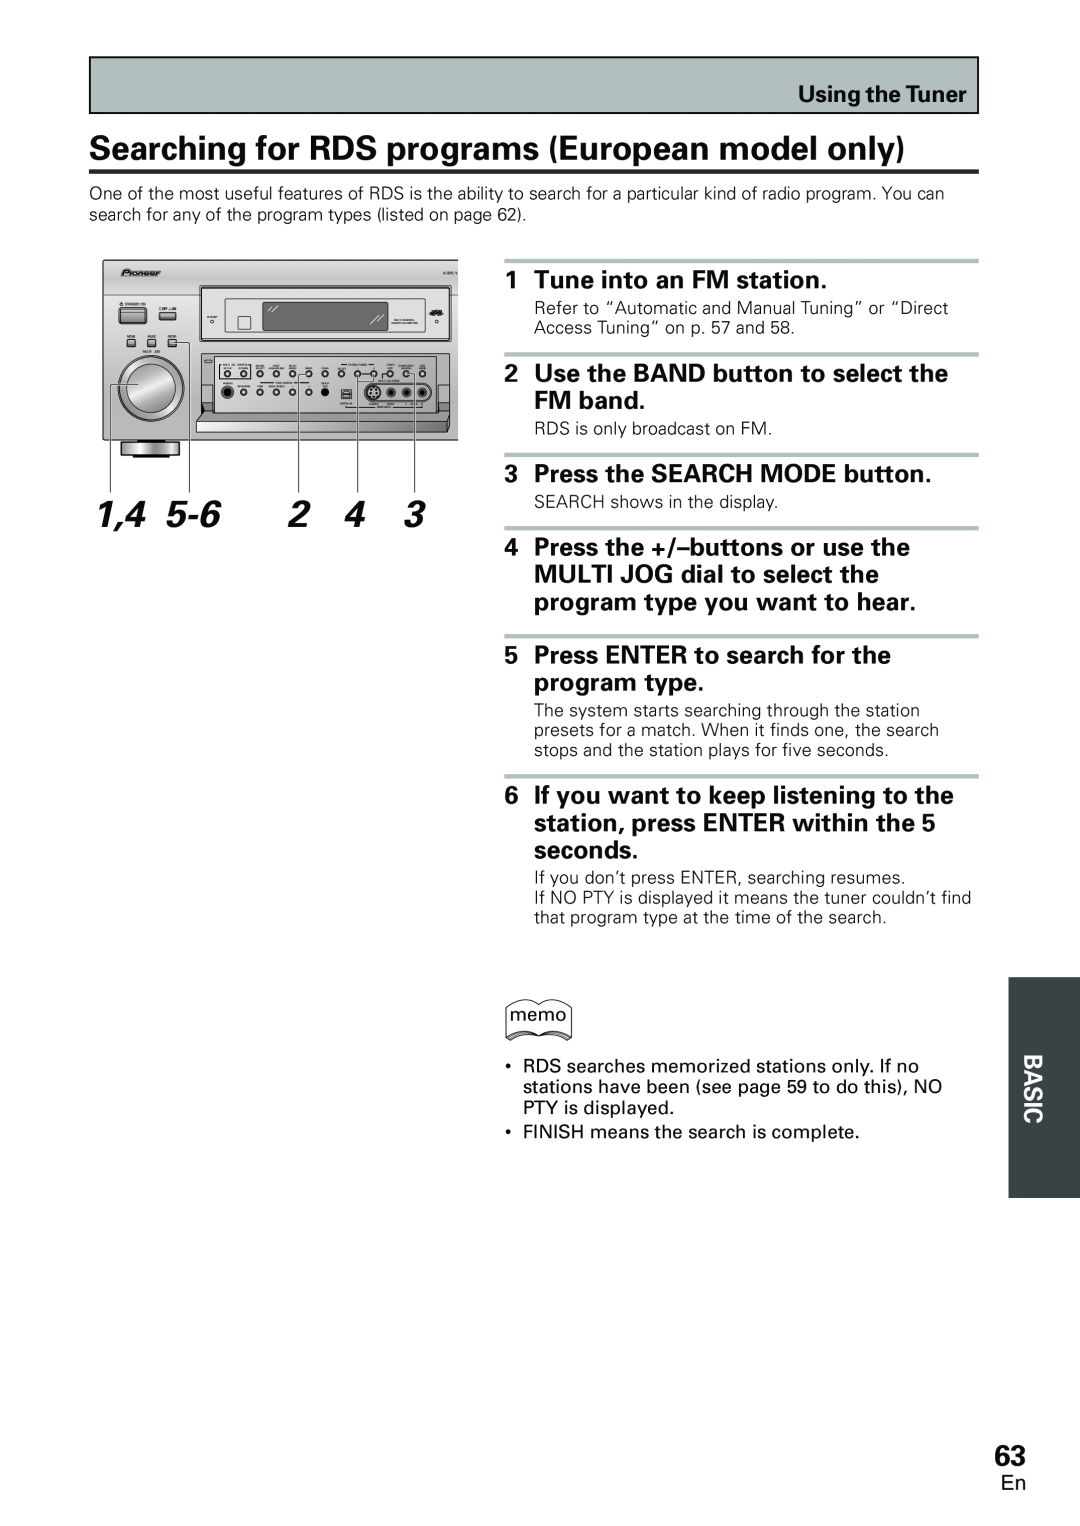 Pioneer VSX-D2011-S Searching for RDS programs European model only, Tune into an FM station, Press the SEARCH MODE button 